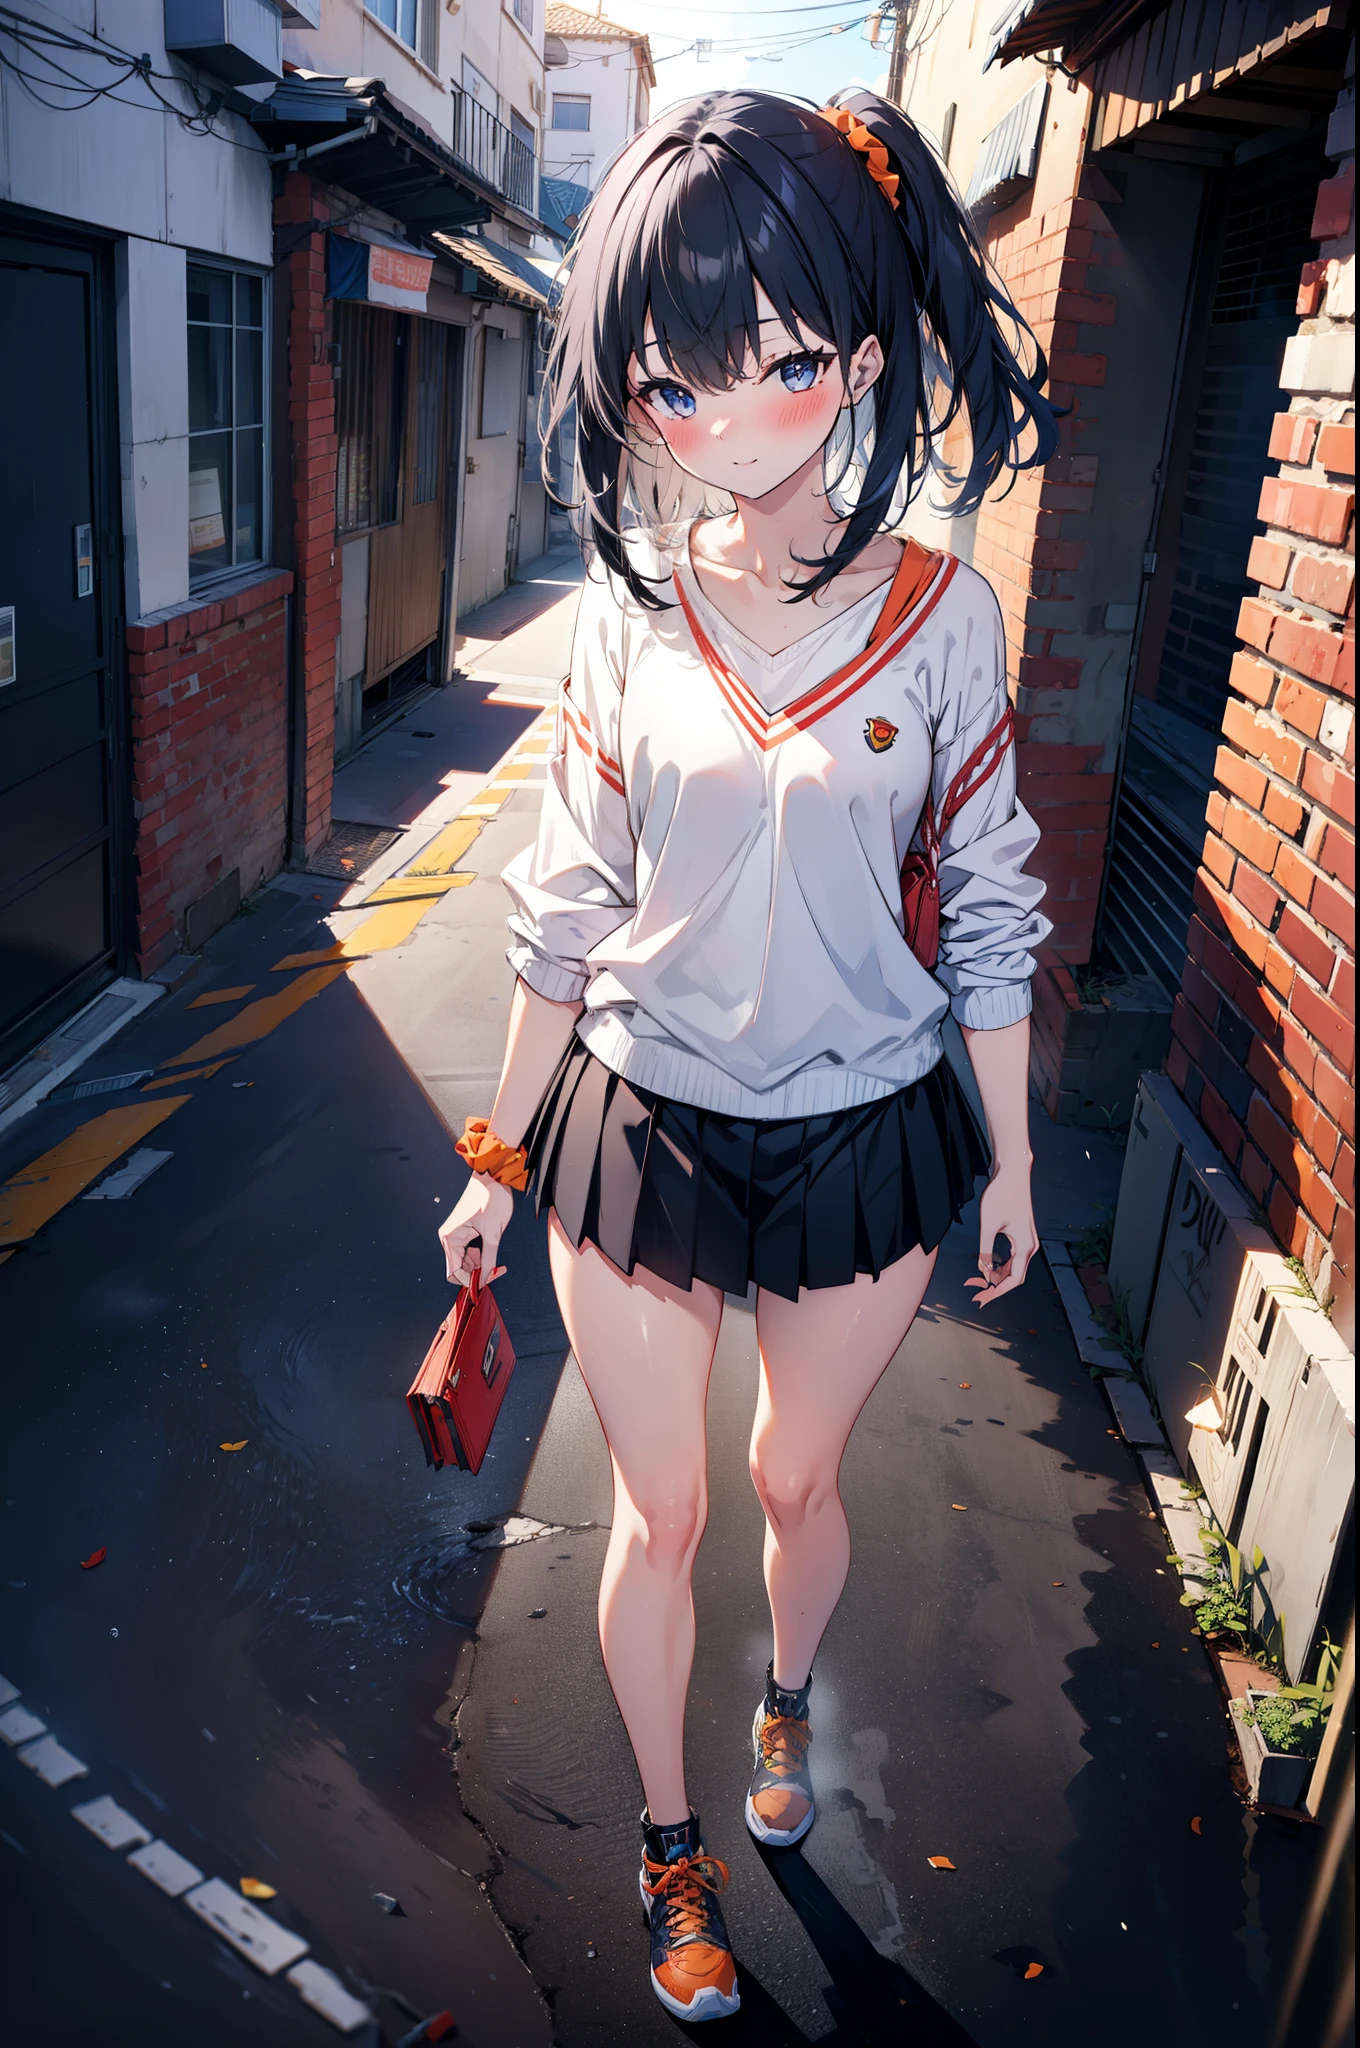 Rikka body, Affluent backstreets, Black Hair, blue eyes, Long Hair, orange Scrunchie, Scrunchie, wrist Scrunchie,happy smile, smile, Open your mouth,blush,Oversized red one-shoulder sweater,mini skirt,short boots,Walking,So that the whole body goes into the illustration,morning,morning陽,The sun is rising,
Destroy outdoors, Building district,
壊す looking at viewer, Systemic
break (masterpiece:1.2), Highest quality, High resolution, unity 8k wallpaper, (figure:0.8), (Beautiful attention to detail:1.6), Highly detailed face, Perfect lighting, Highly detailed CG, (Perfect hands, Perfect Anatomy),